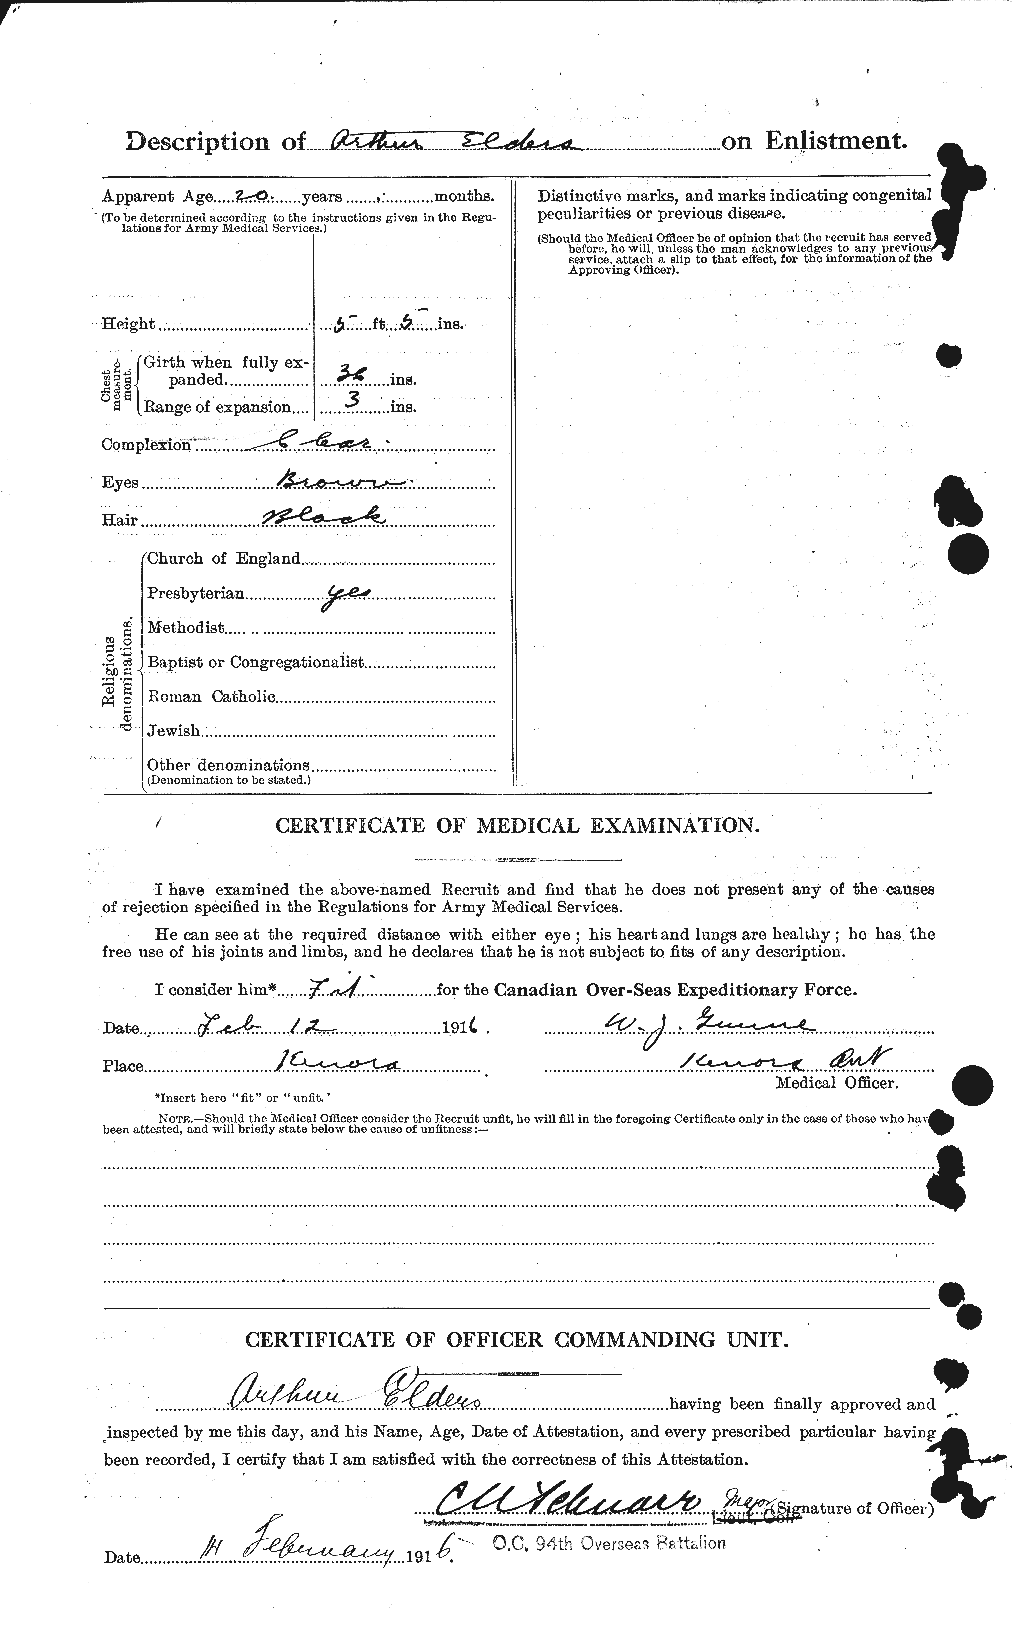 Personnel Records of the First World War - CEF 312394b